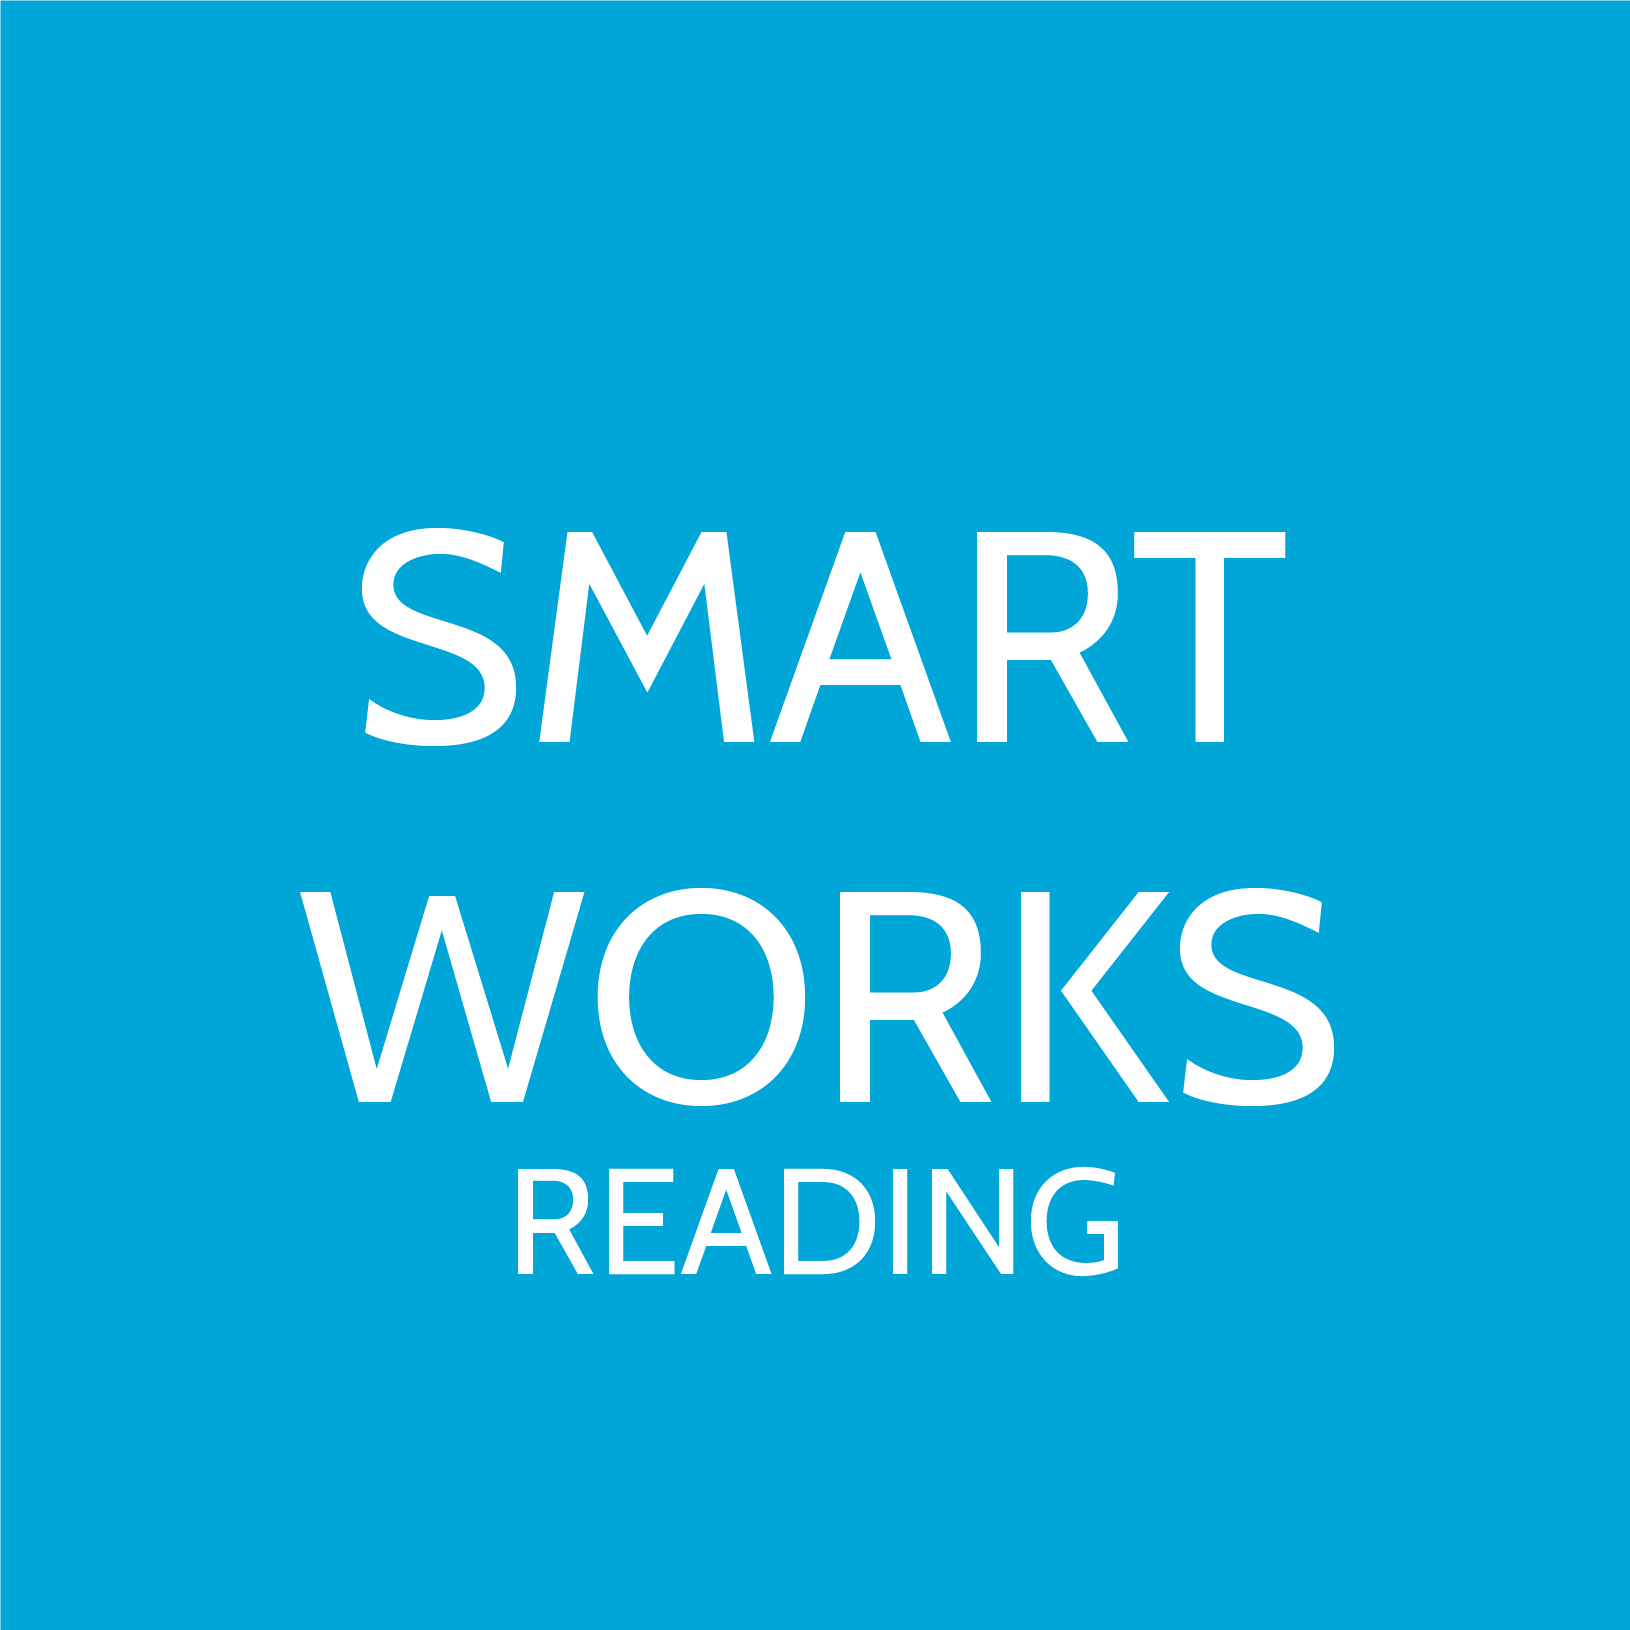 A teal square with the words Smart Works Reading on it in white